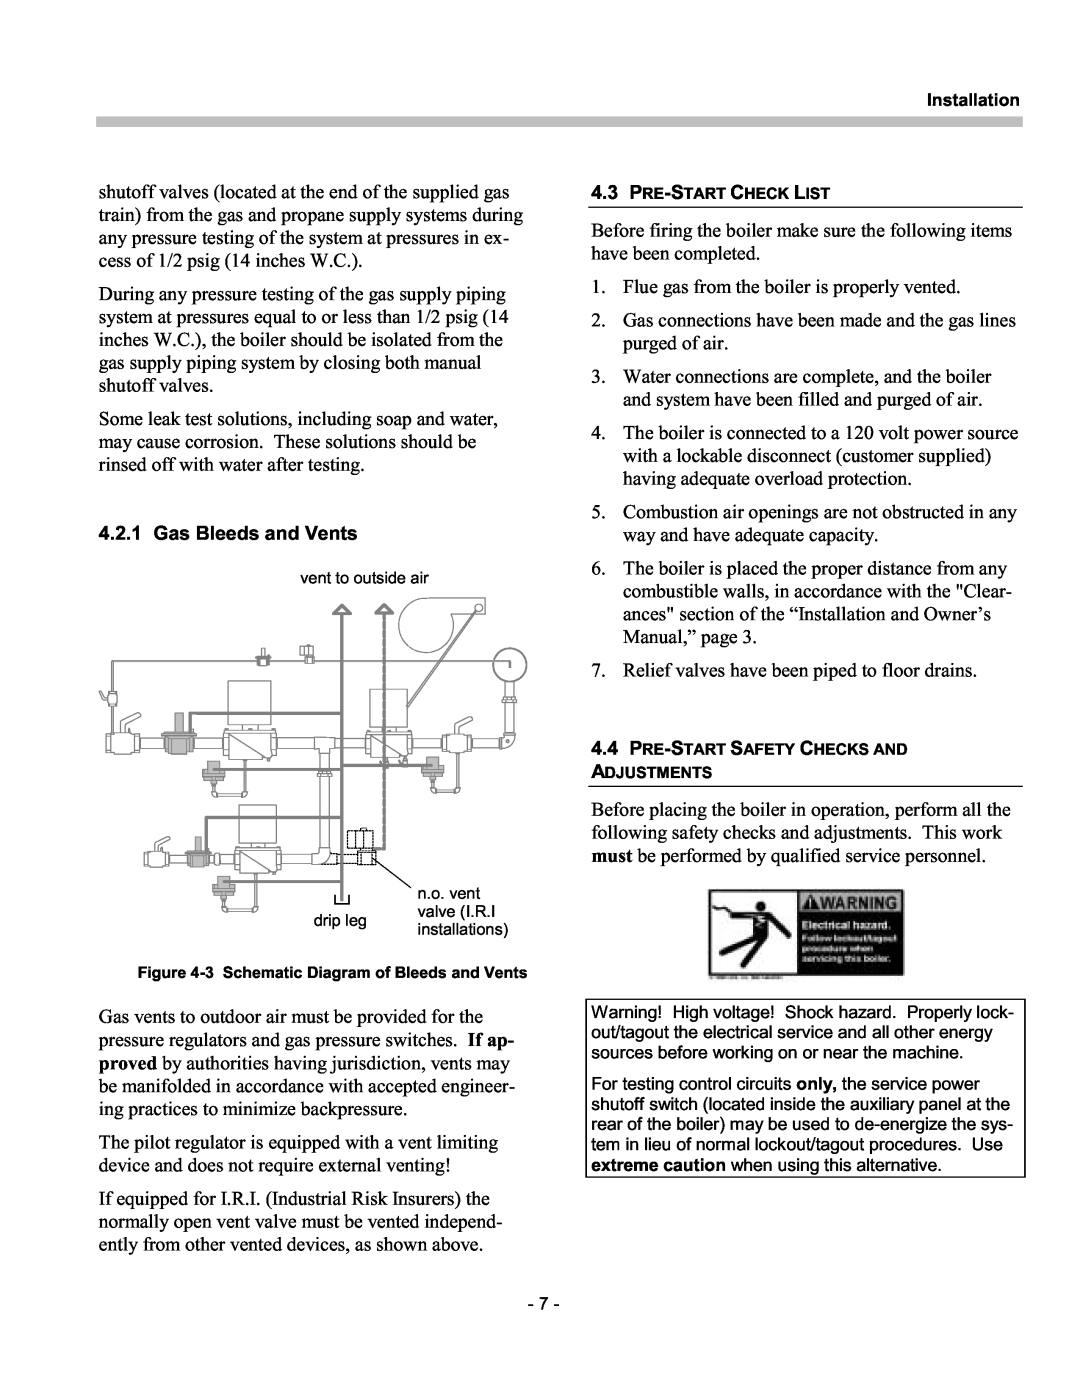 Patterson-Kelley TBIG-03 owner manual Gas Bleeds and Vents 